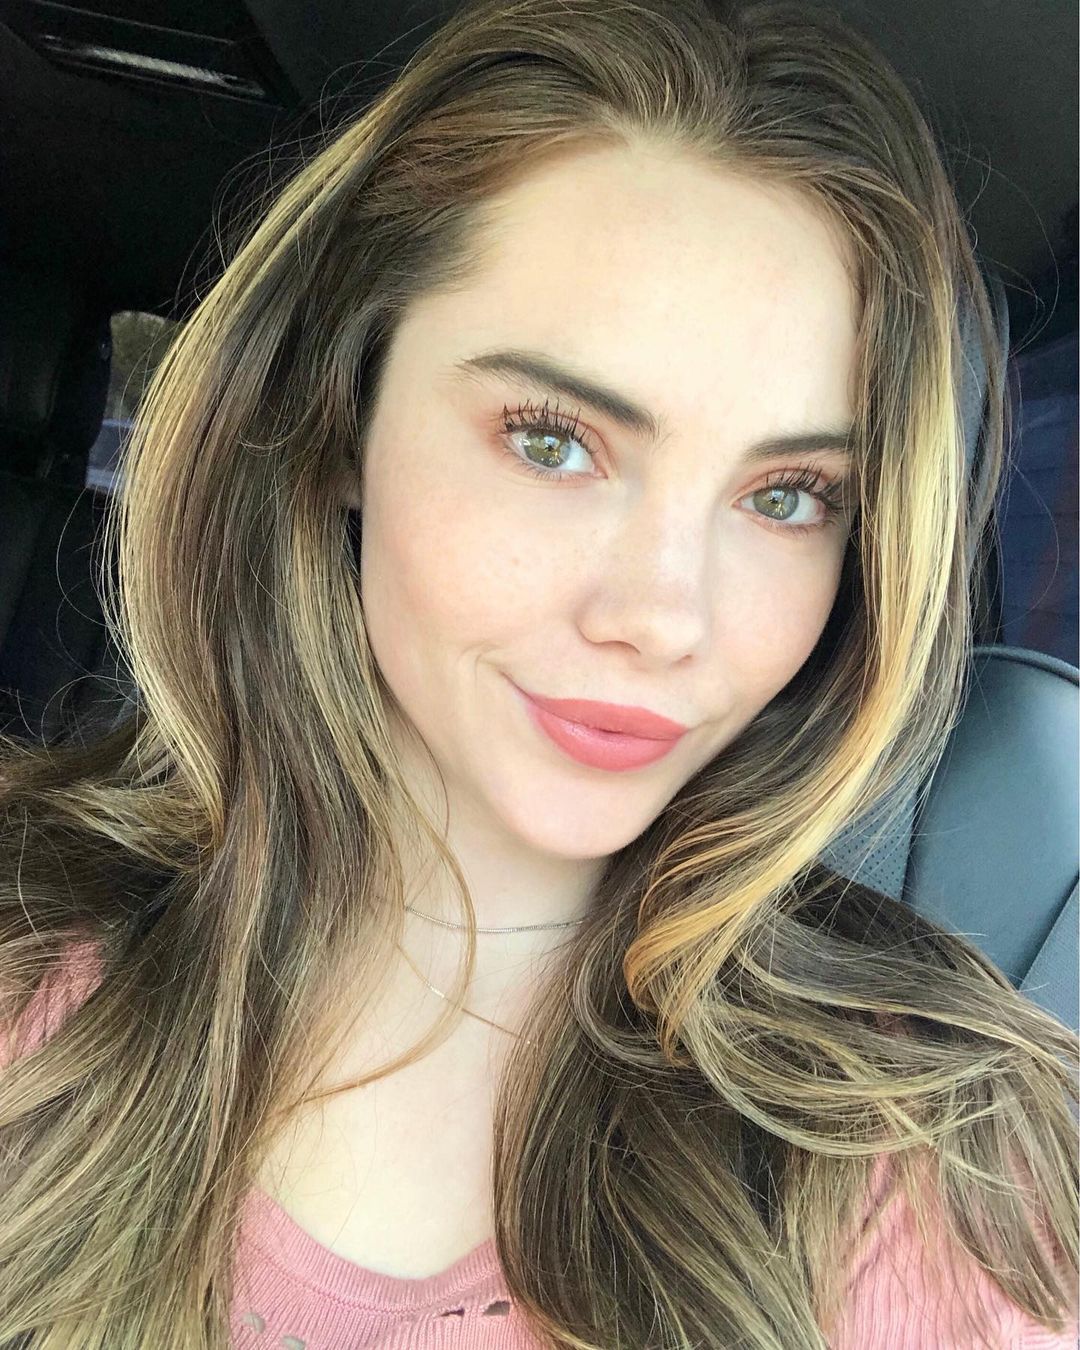 McKayla Maroney Addresses Fathers Death in IG Message 